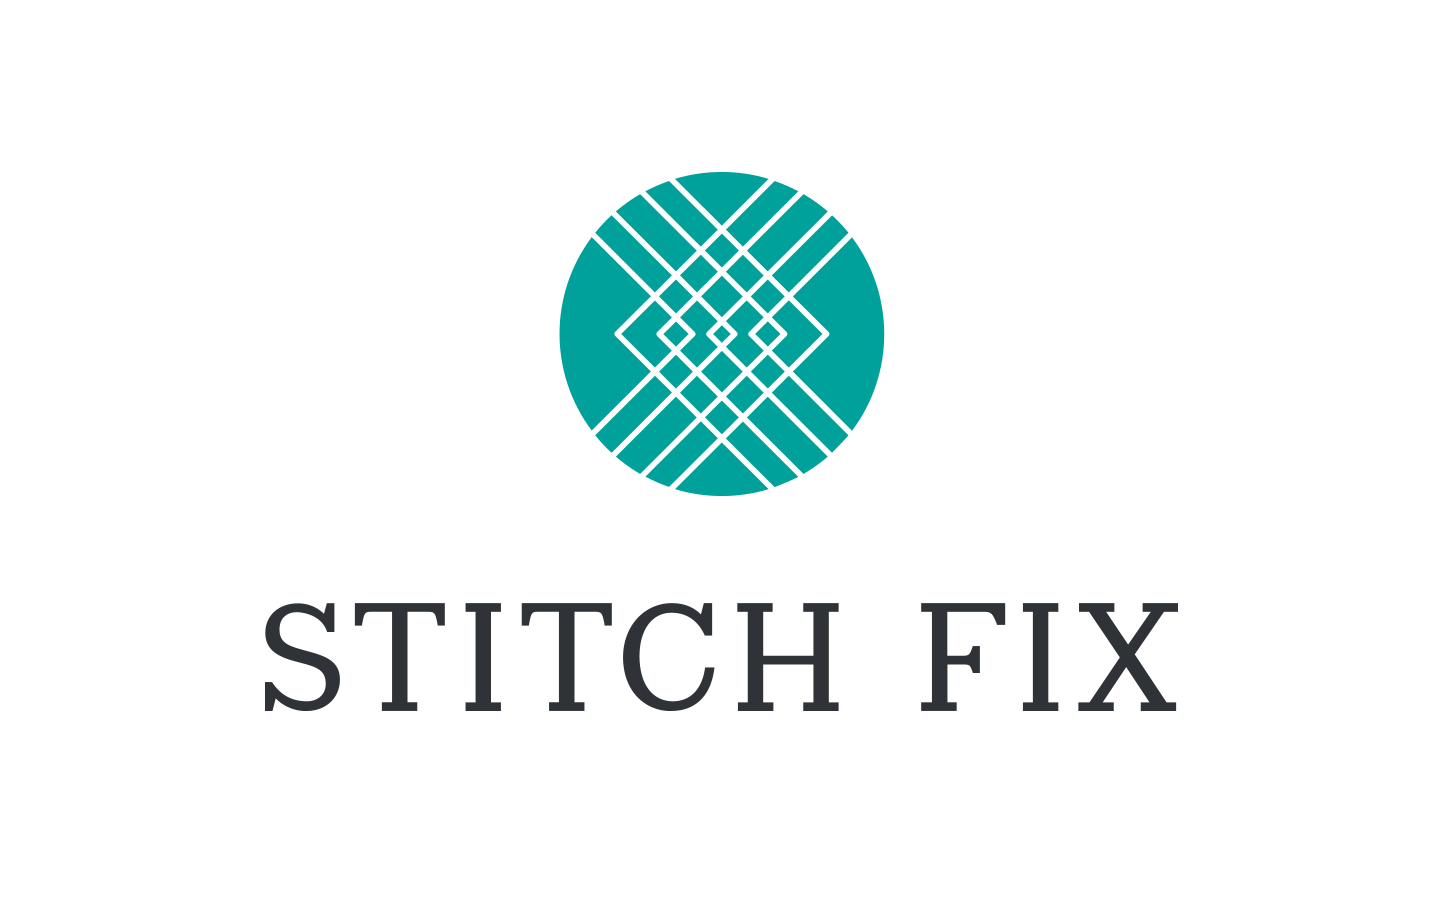 Stitch Fix Faces Price Target Cuts By Analysts Following Q4 Results, Shares Slide